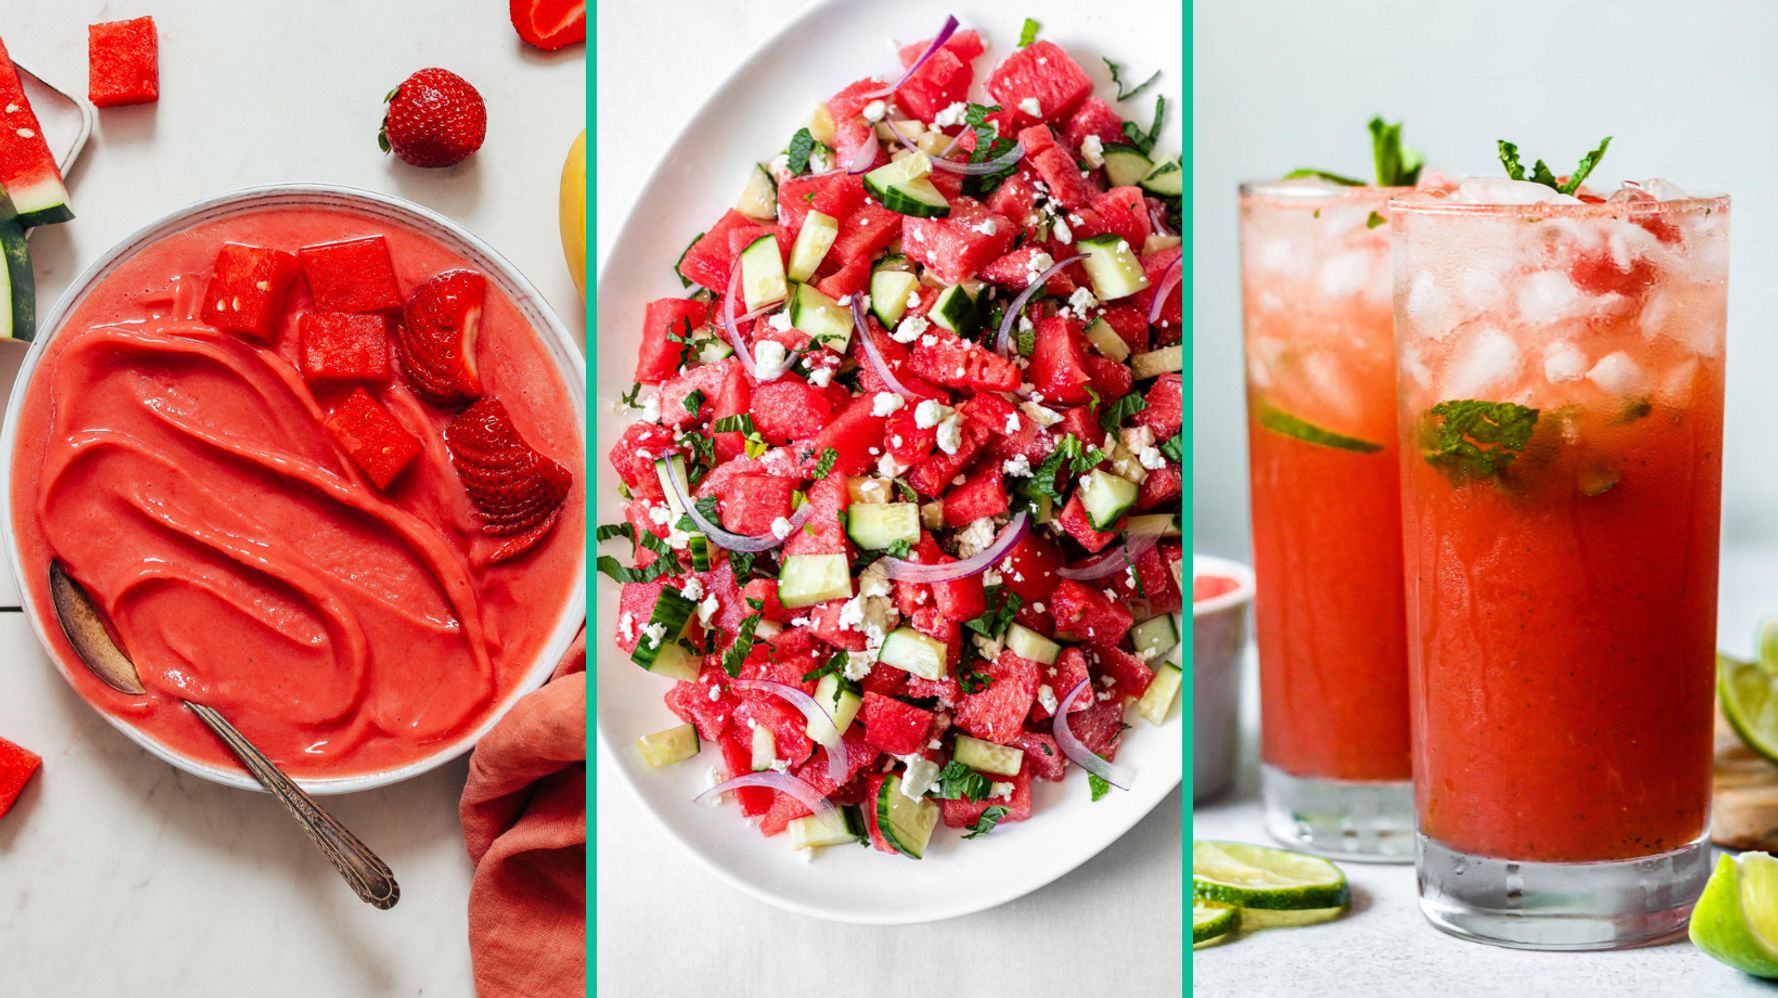 Got A Watermelon And No Plans For It? Here Are 20 Delicious Ideas